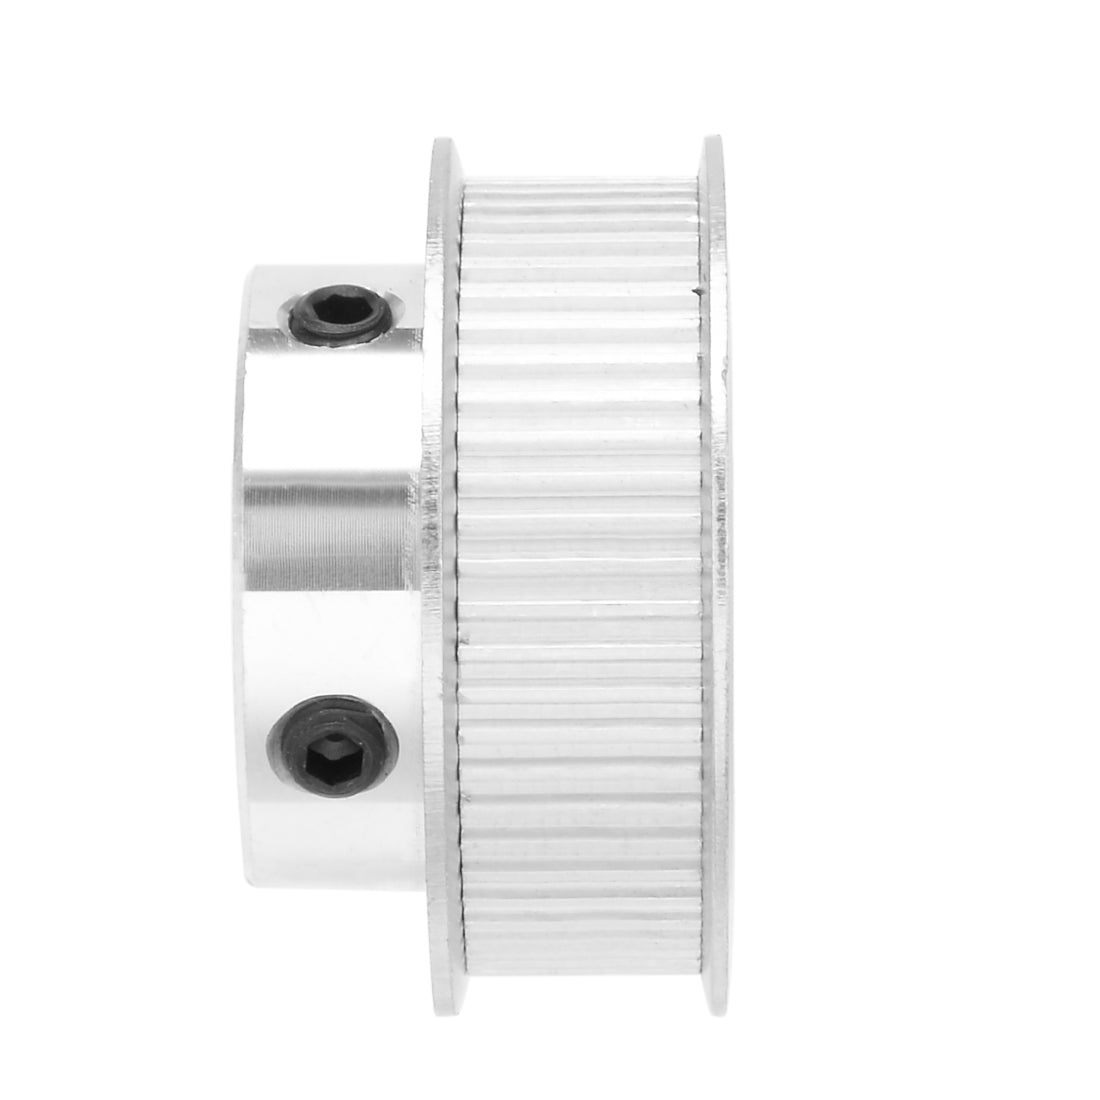 uxcell Uxcell Aluminum M-X-L 60 Teeth 15mm Bore Timing Belt Idler Pulley Synchronous Wheel 10mm Belt for 3D Printer CNC